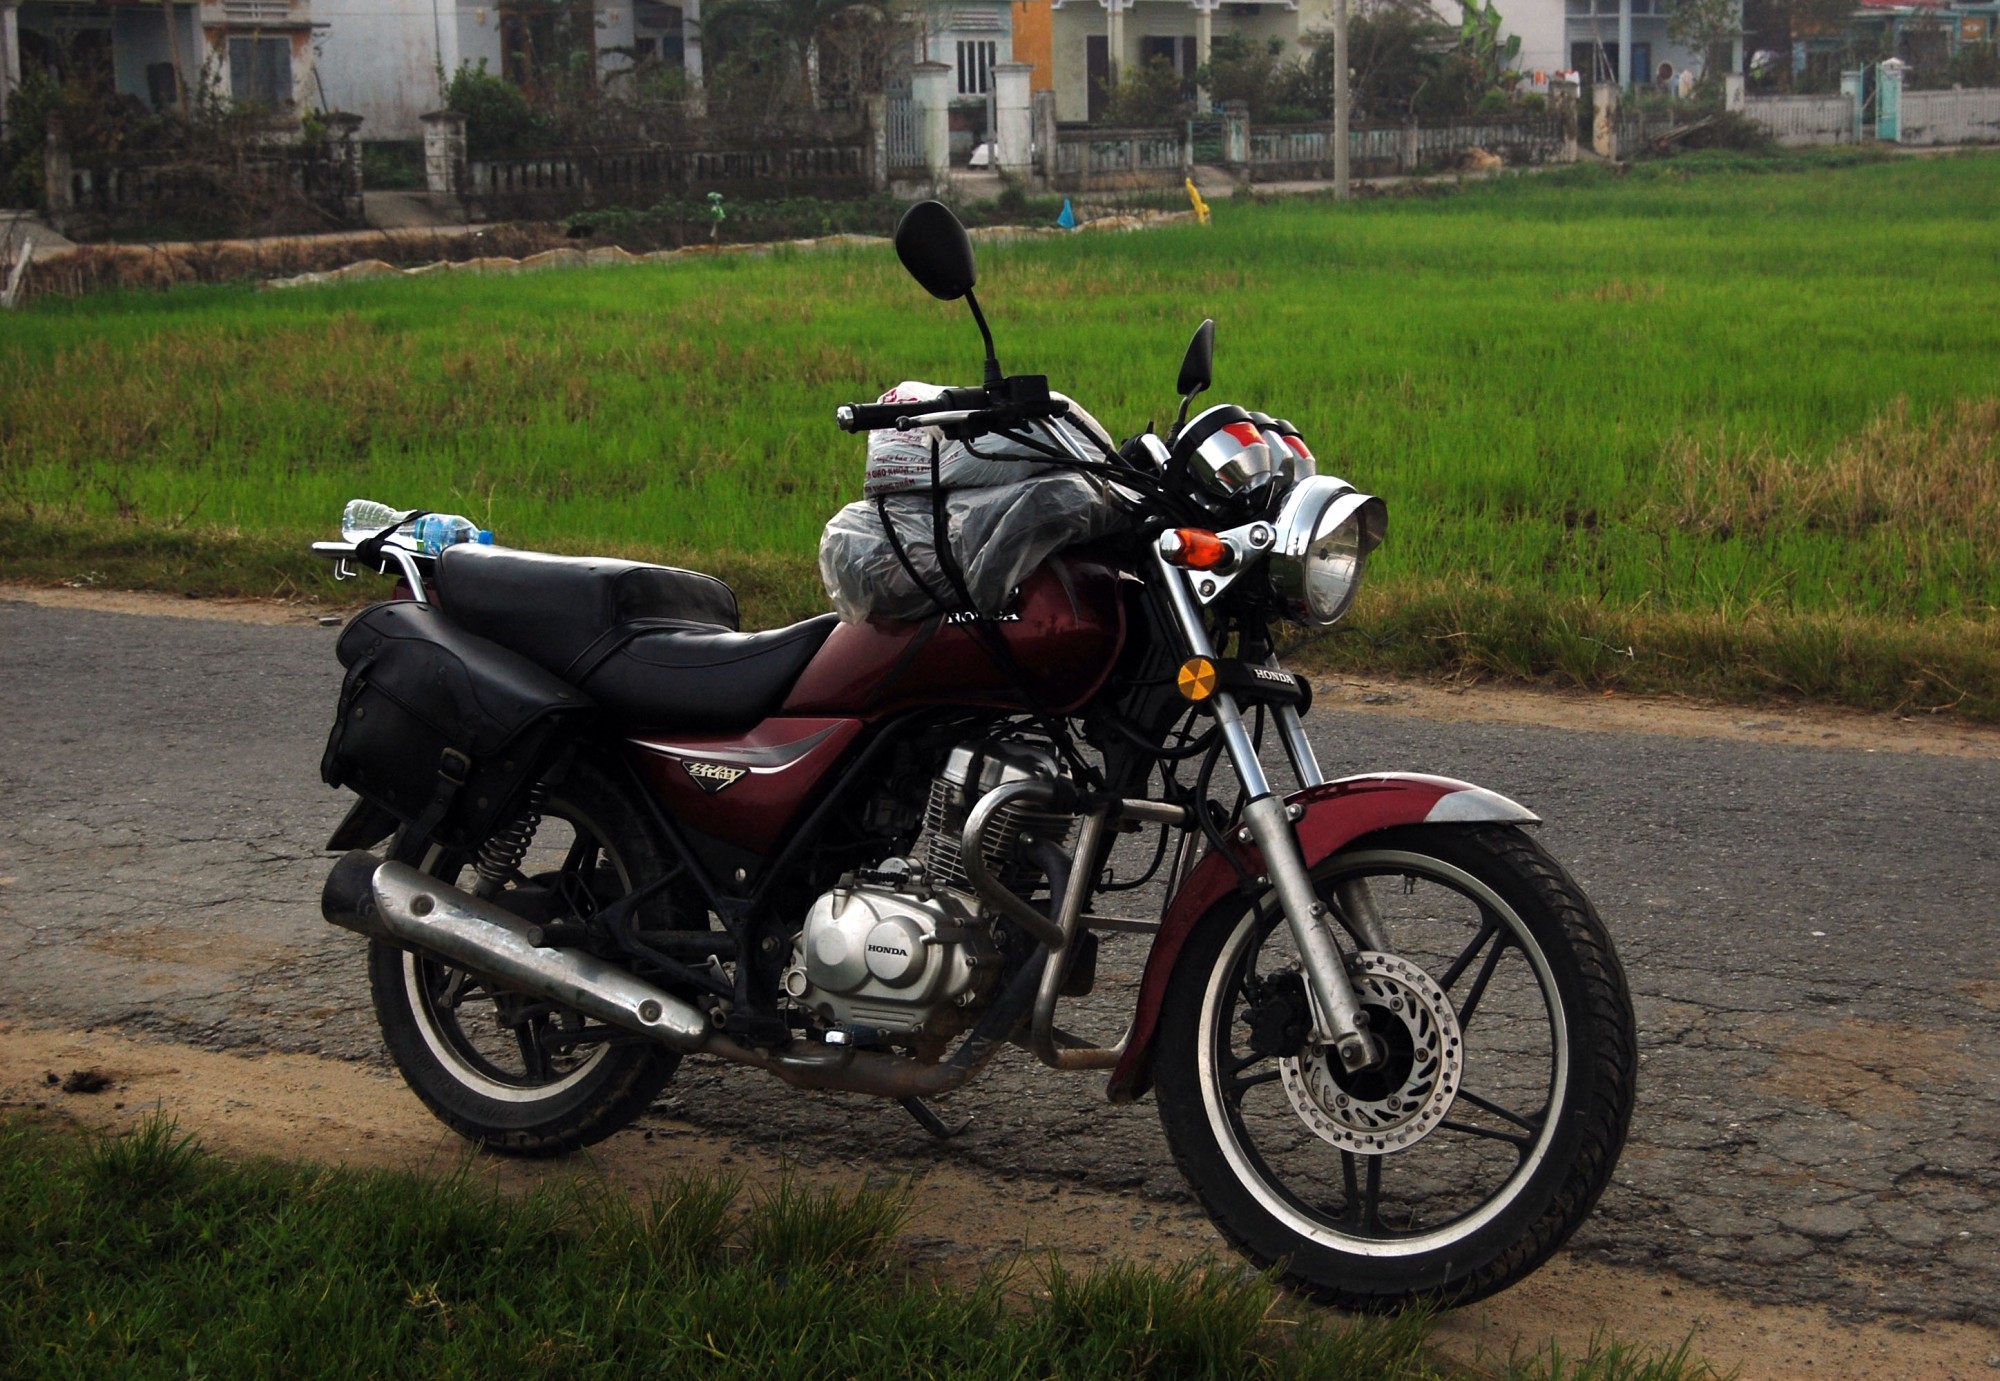 This Honda motorbike was my home for a motorcycle tour in Vietnam.